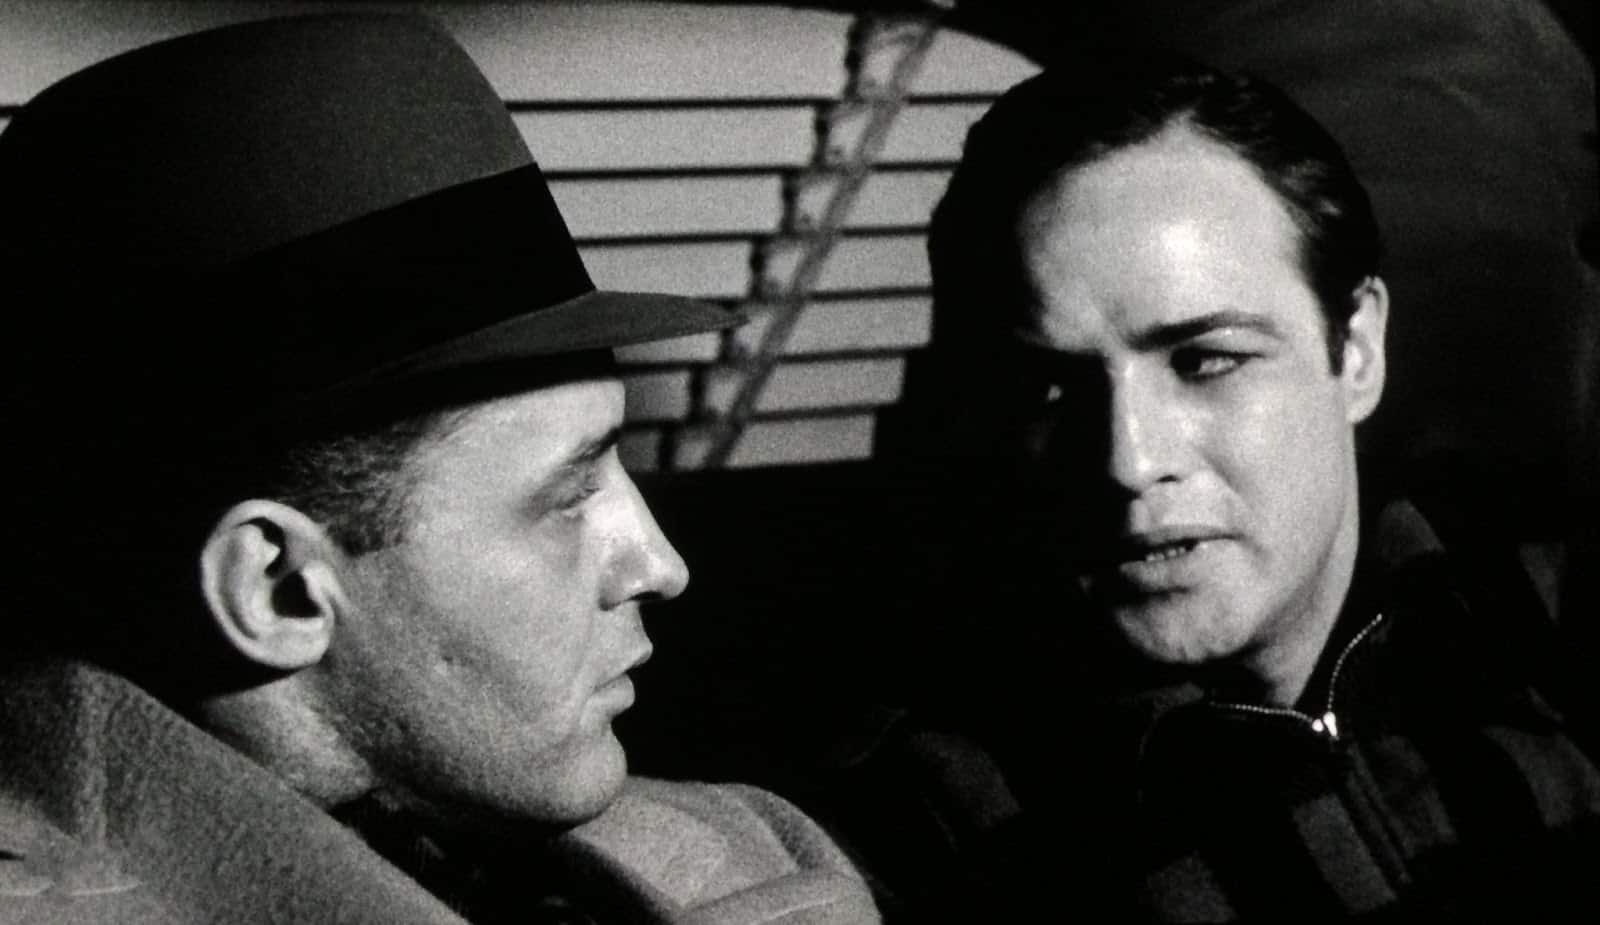 On The Waterfront (1954)